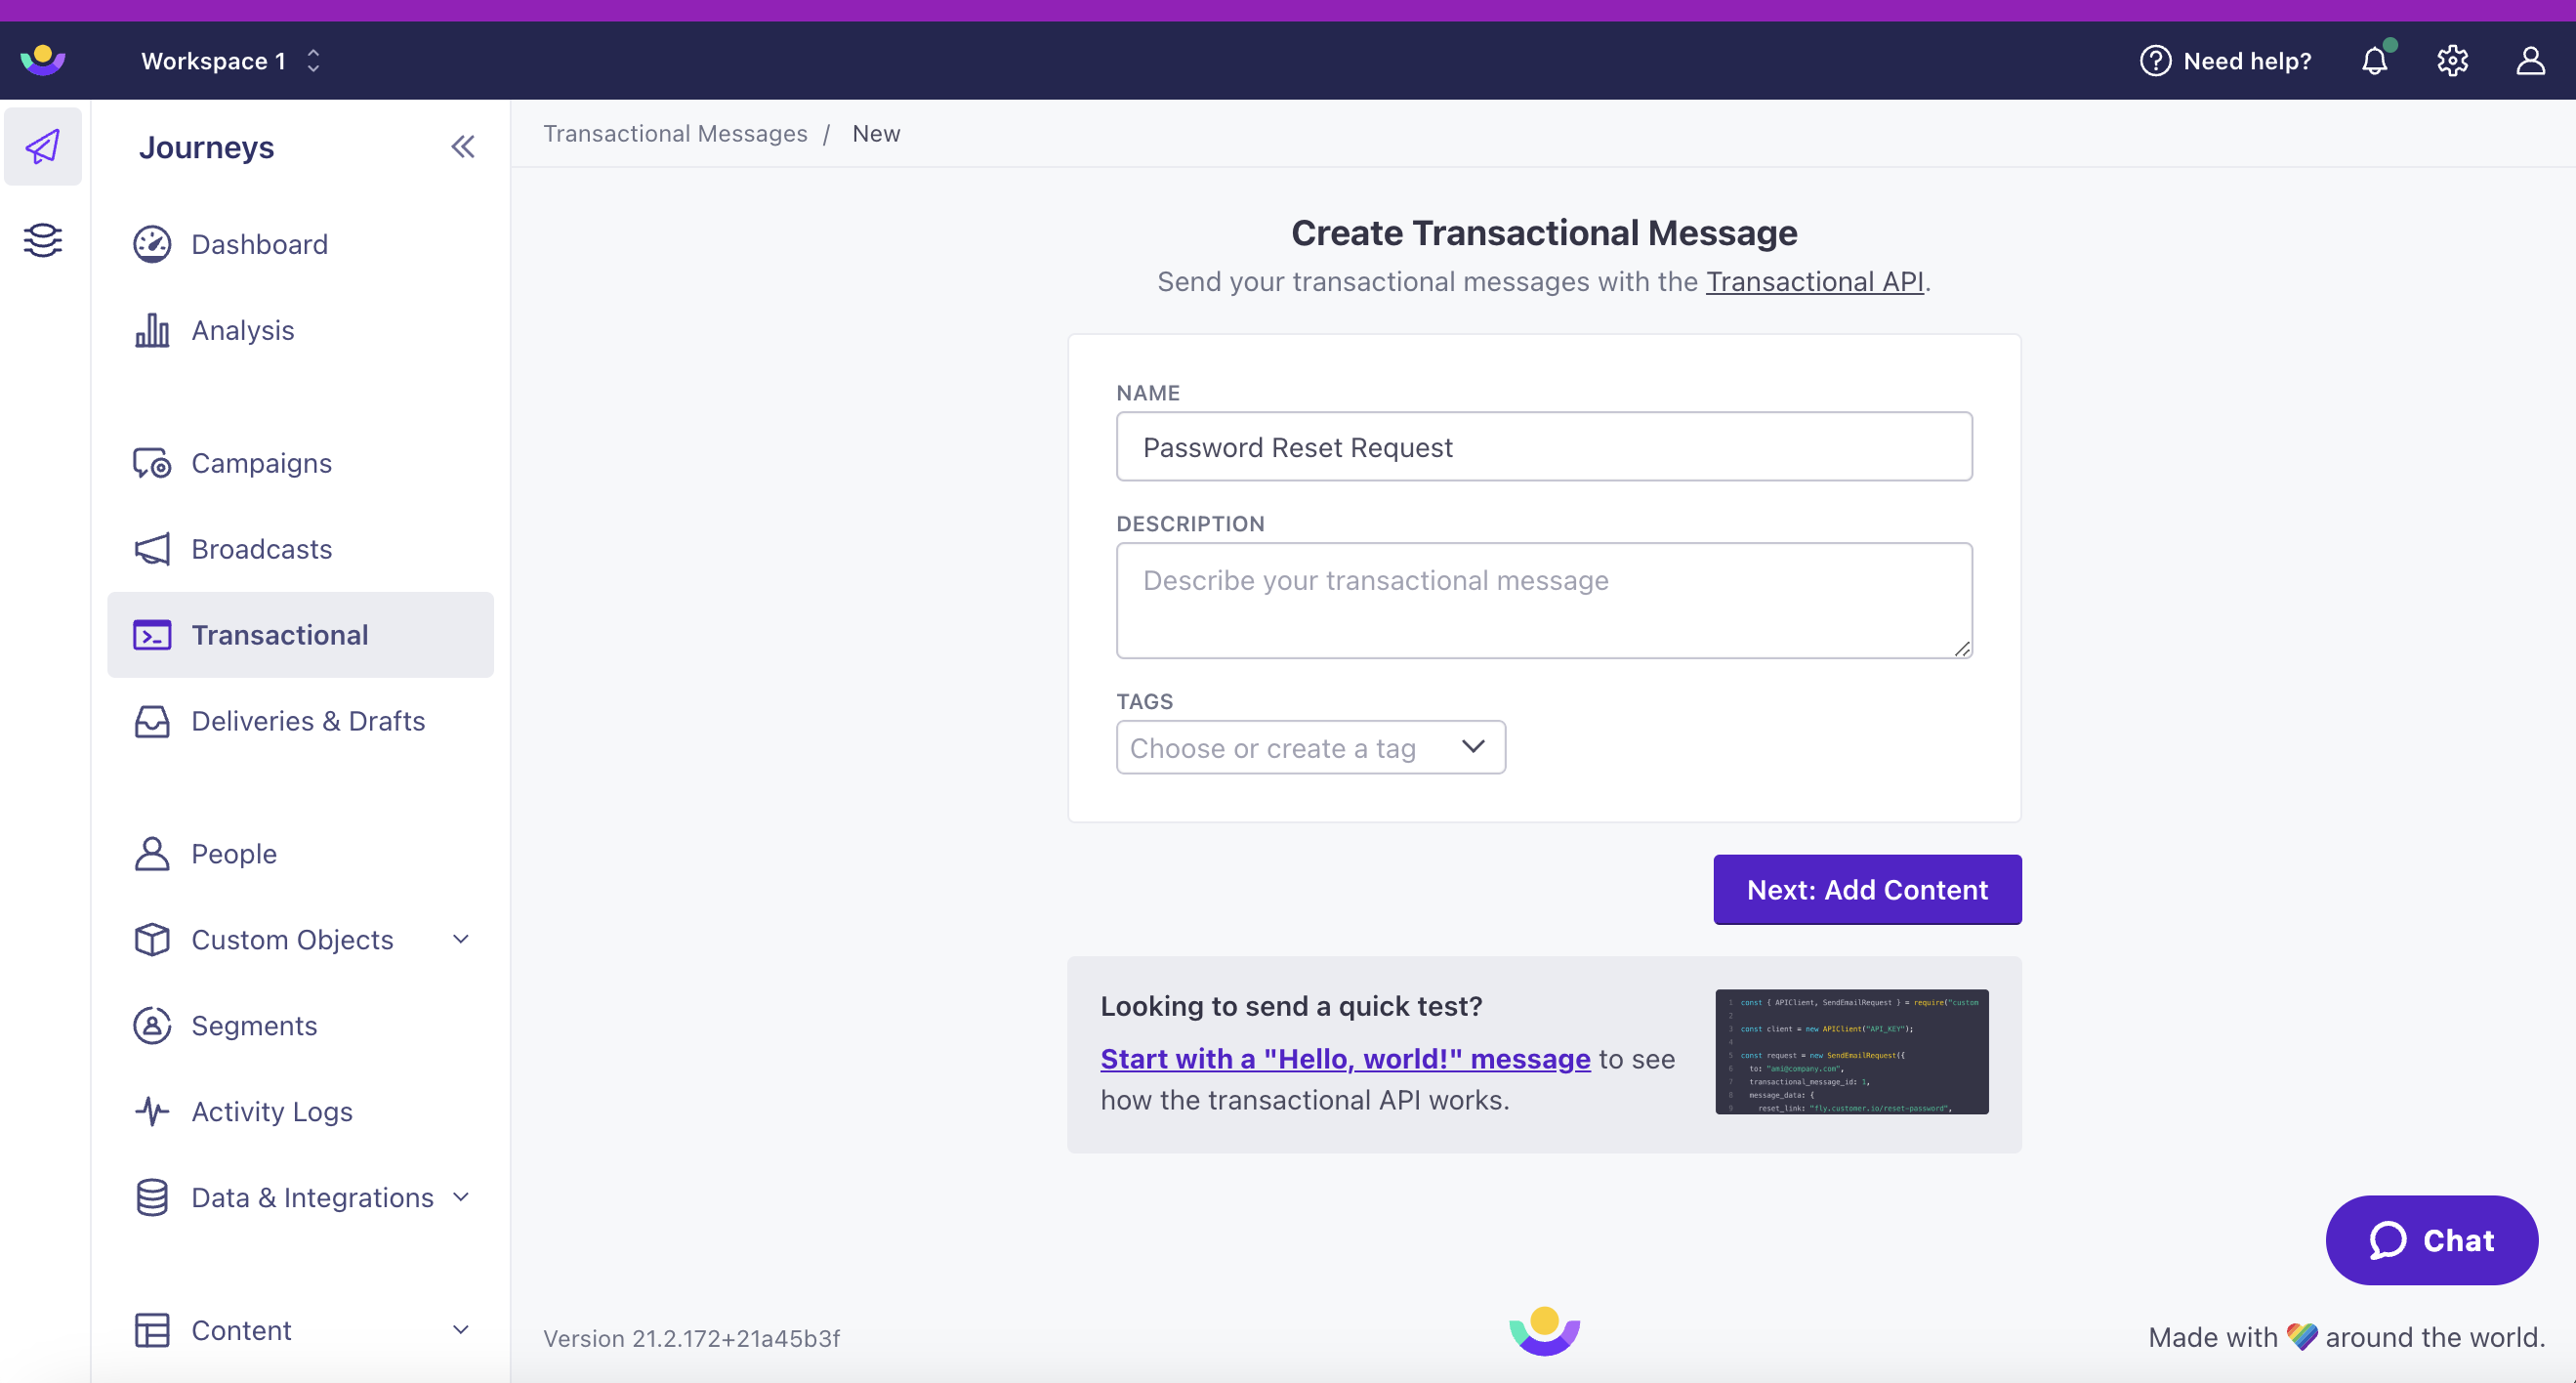 Transactional is selected in the left hand navigation. The image is from the first step of creating a transactional message. The name is Password Reset Request.